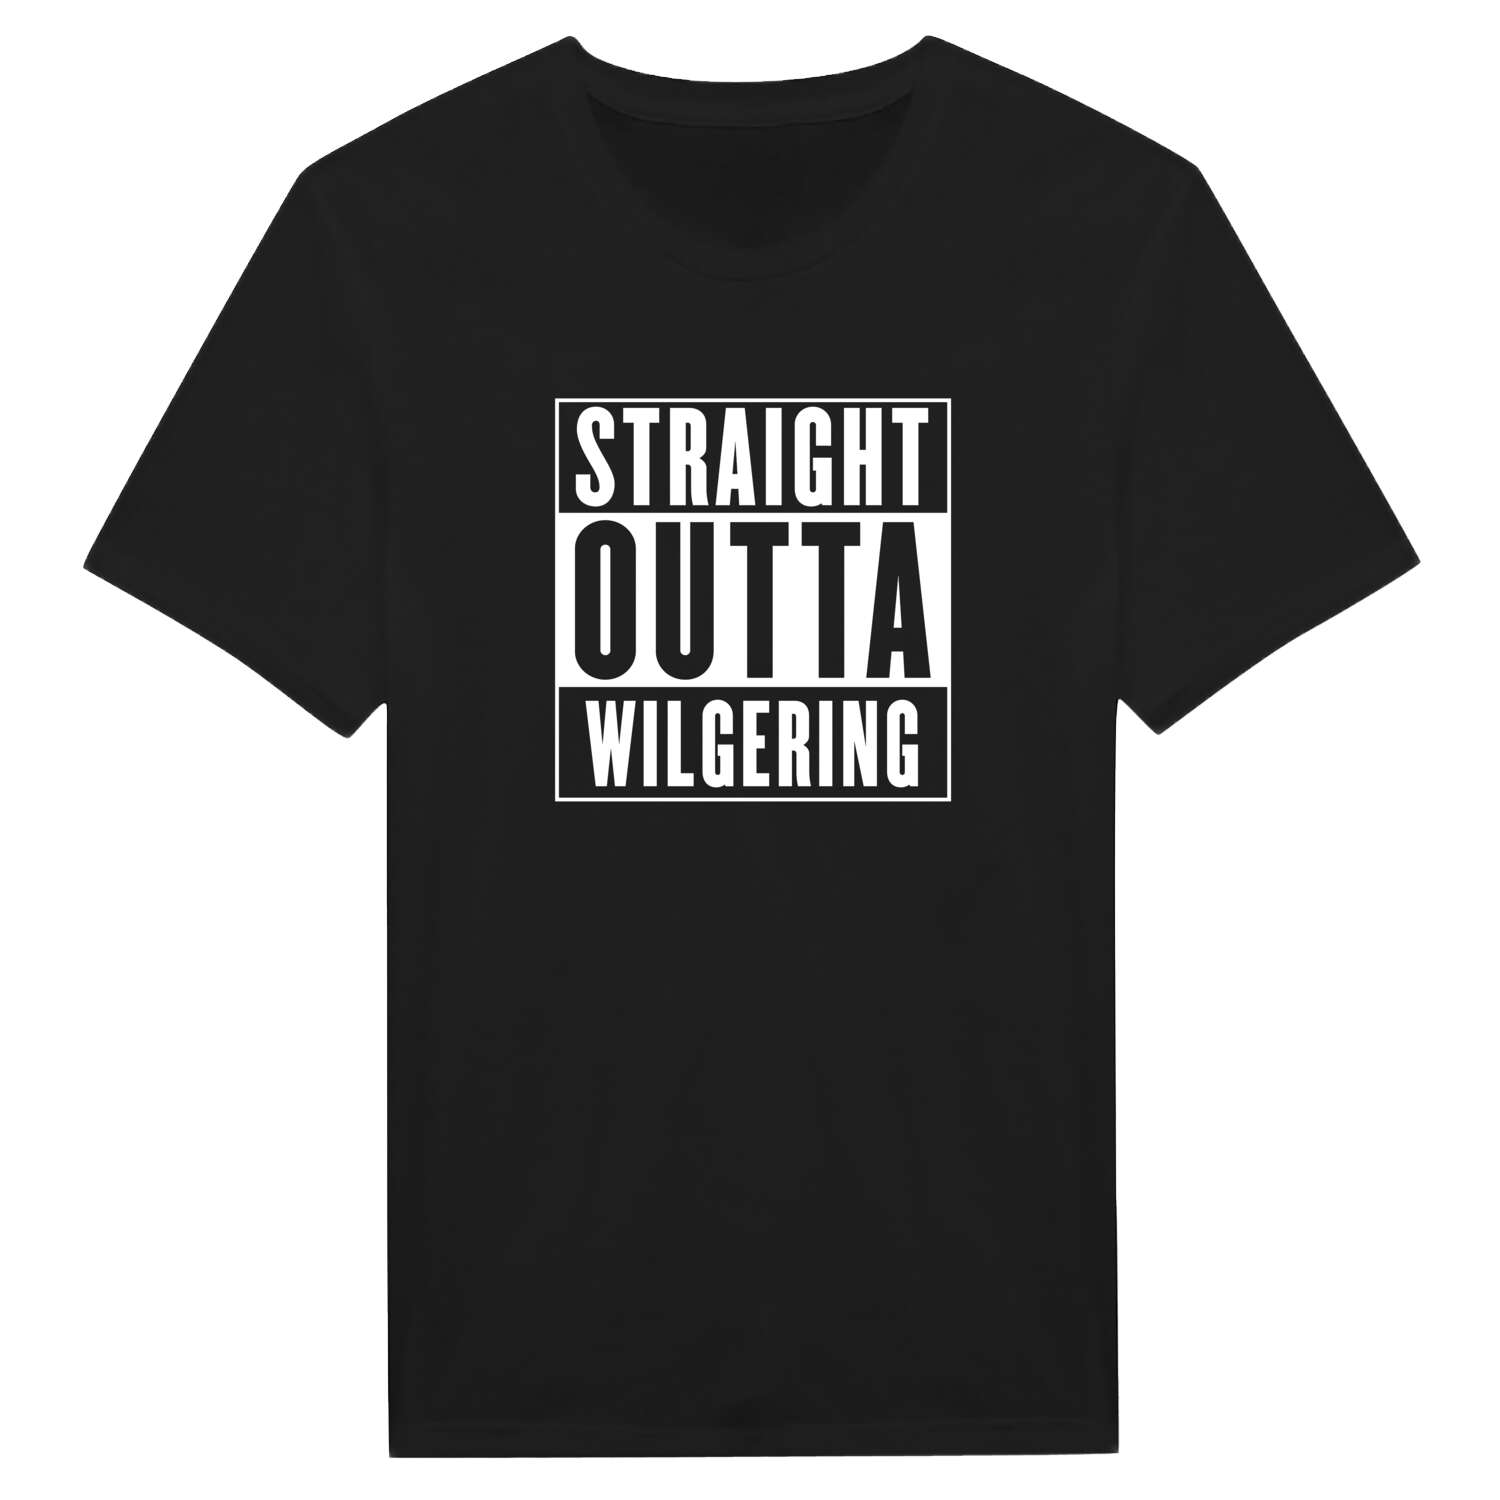 Wilgering T-Shirt »Straight Outta«